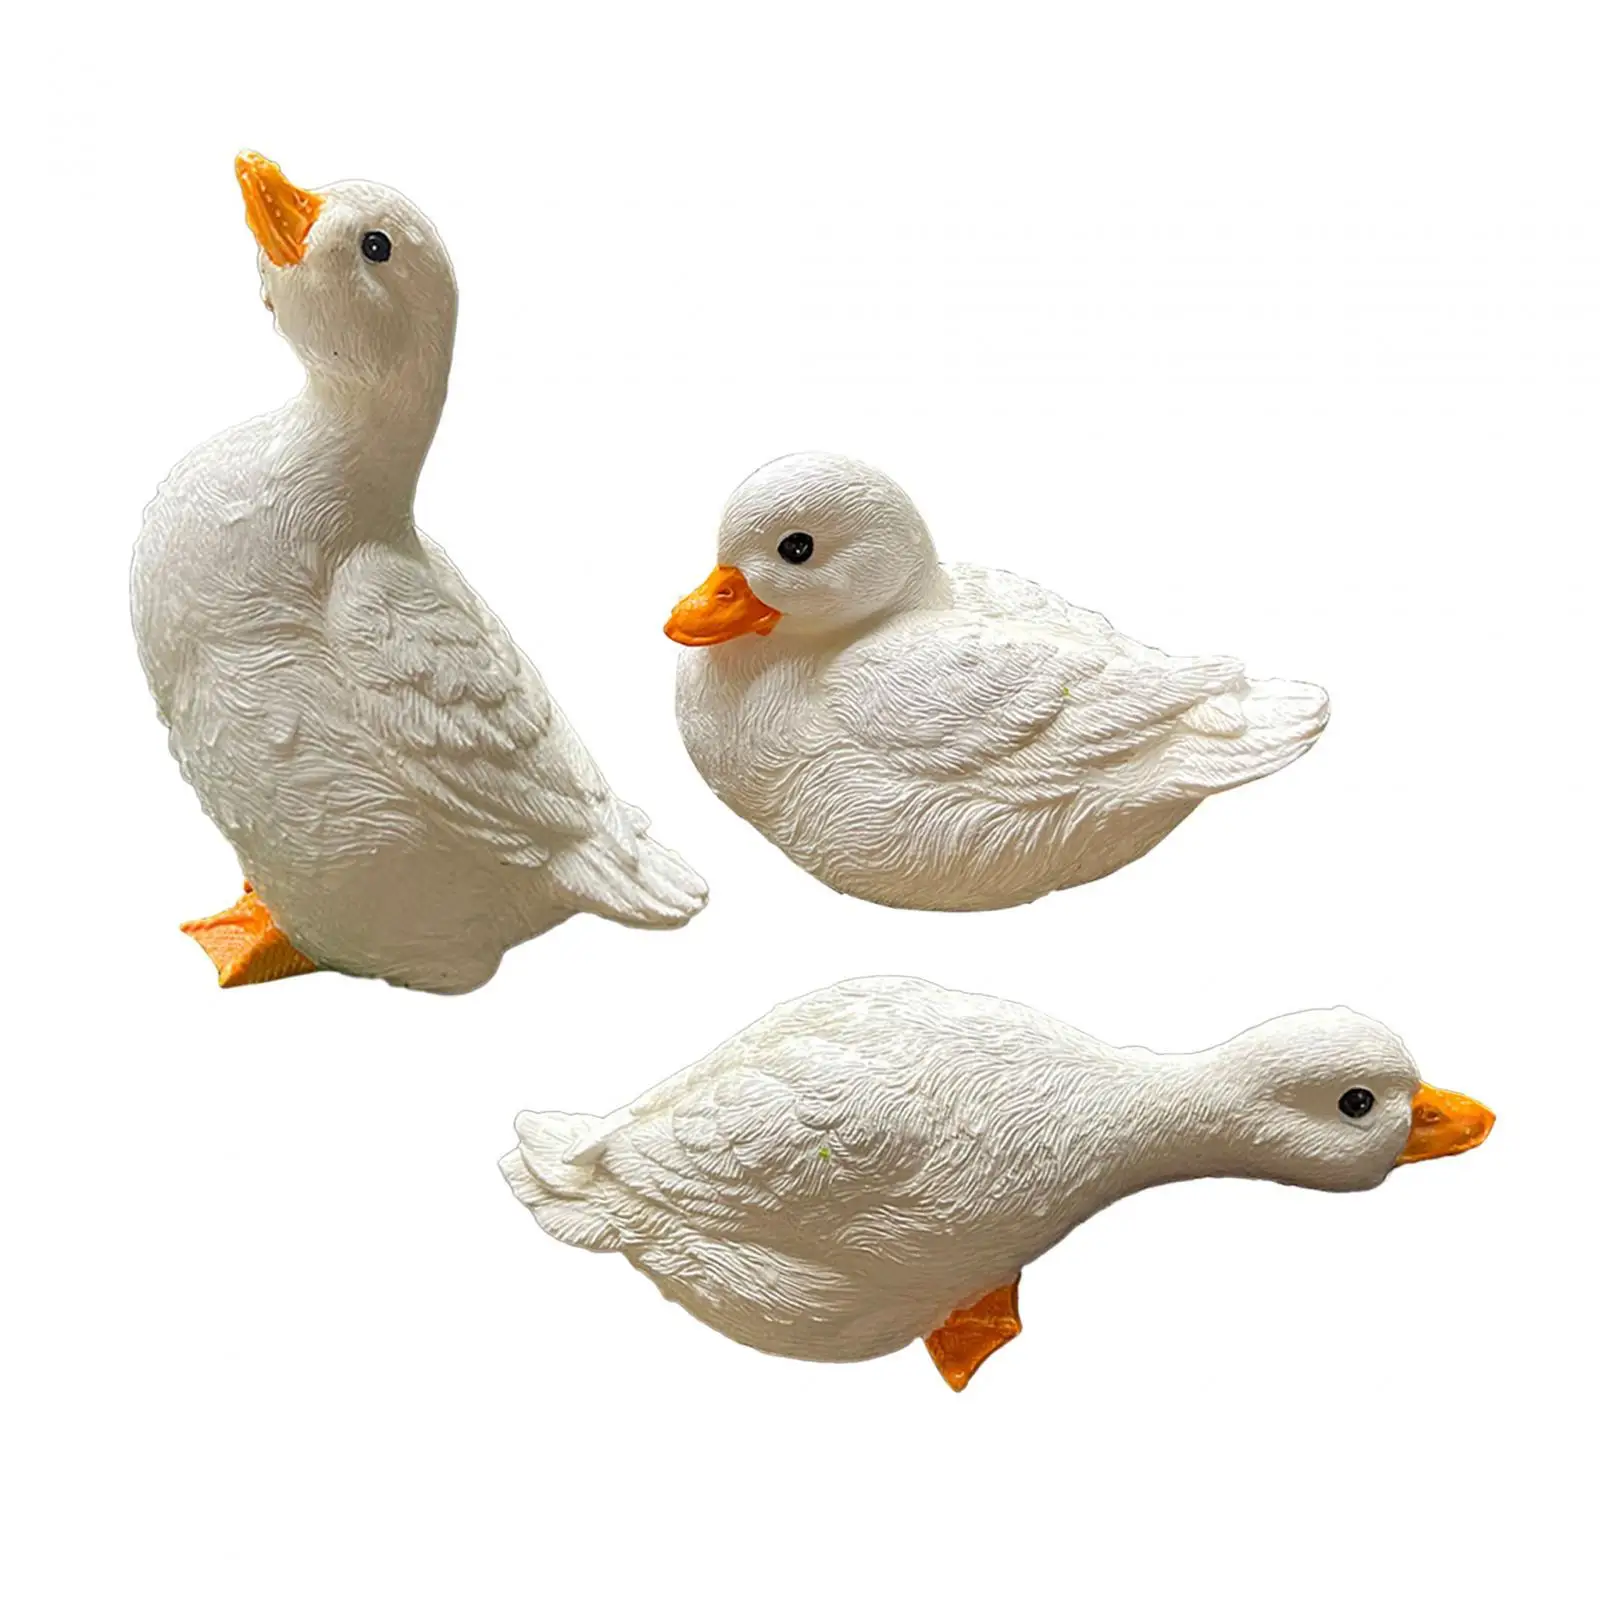 3x Resin Statues Small Duck Statues Home Decor for Landscaping Room Office